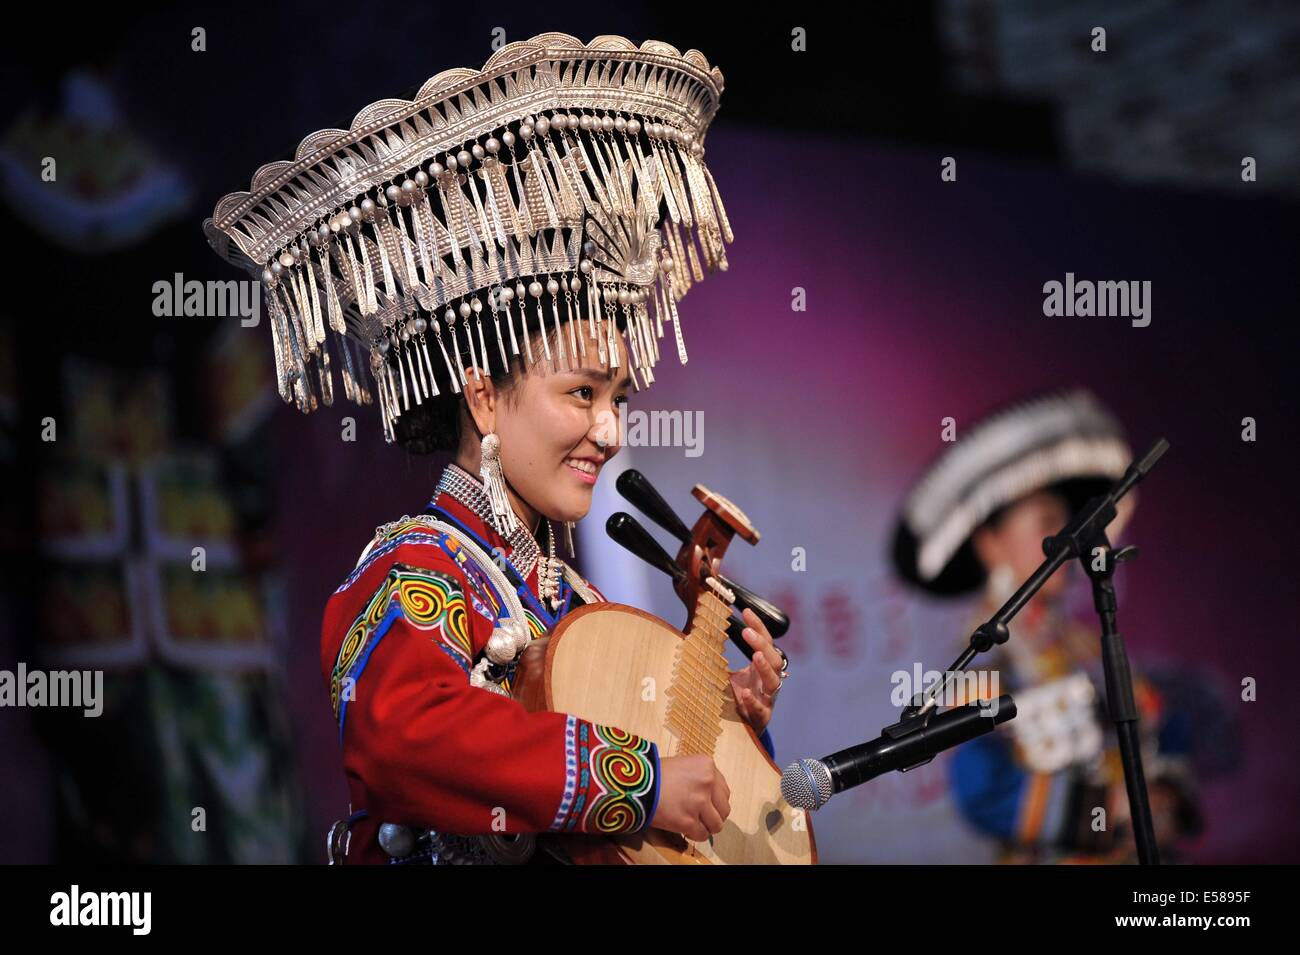 Xichang, China's Sichuan Province. 23rd July, 2014. A woman of the Yi ethnic group performs during a talent show of a traditional beauty contest at Xichang City, southwest China's Sichuan Province, July 23, 2014. The beauty contest is one of the most important activities during the annual Torch Festival at Liangshan Yi Autonomous Prefecture. It can date back to over 1,000 years ago in the history of the Yi ethnic group. © Xue Yubin/Xinhua/Alamy Live News Stock Photo